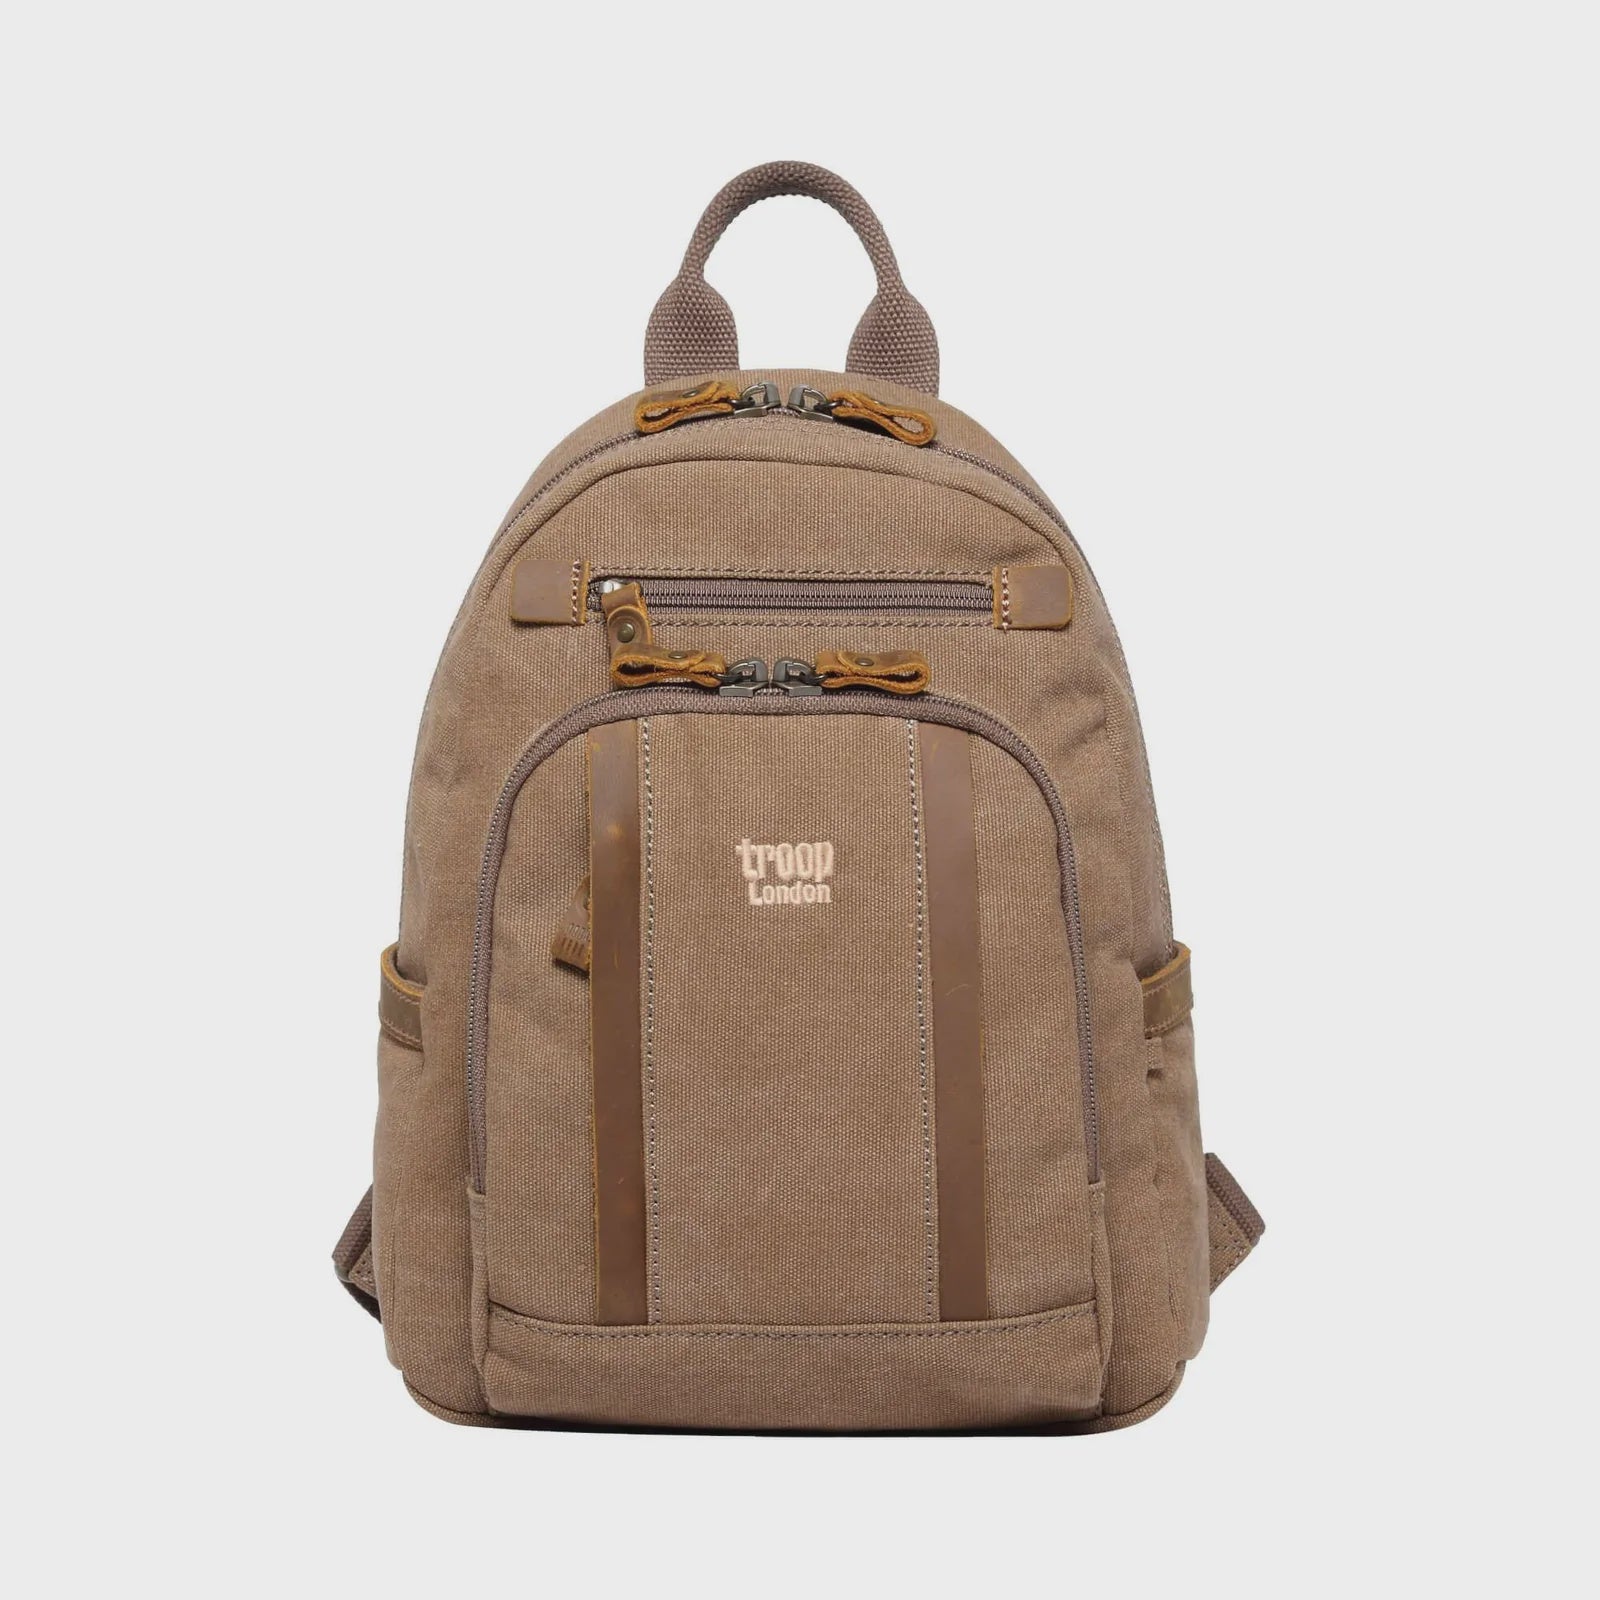 Troop London - Classic Canvas Backpack Small - TRP0255